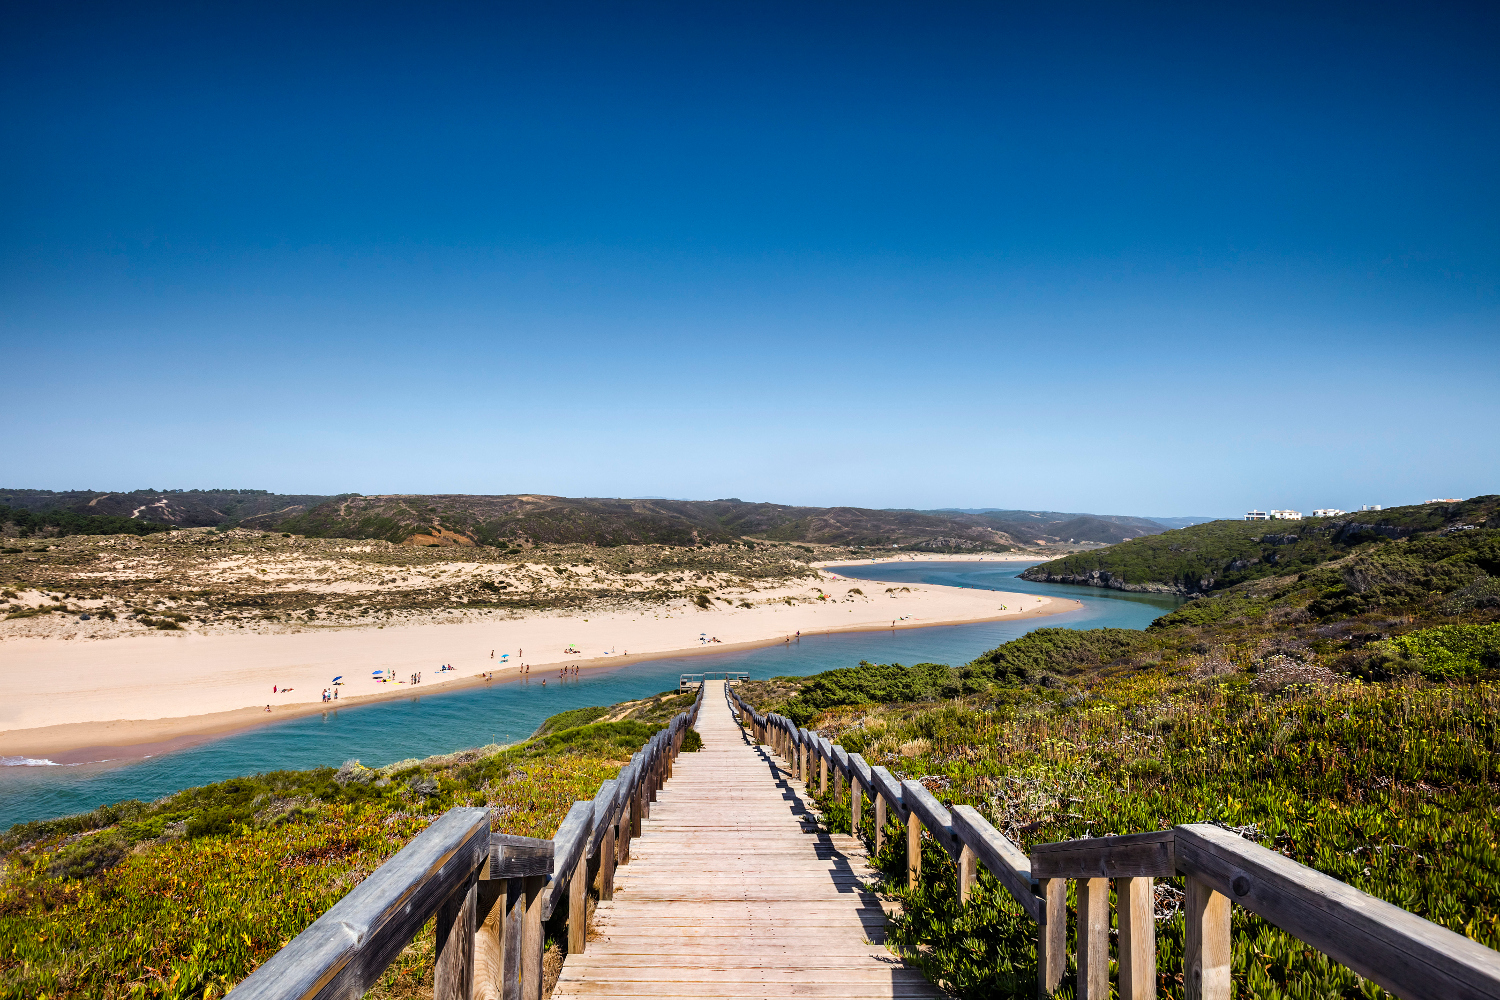 Praia da Amoreira, backed by wild dunes that hide local wildlife. Image by Sabine Lubenow / AWL Images / Getty